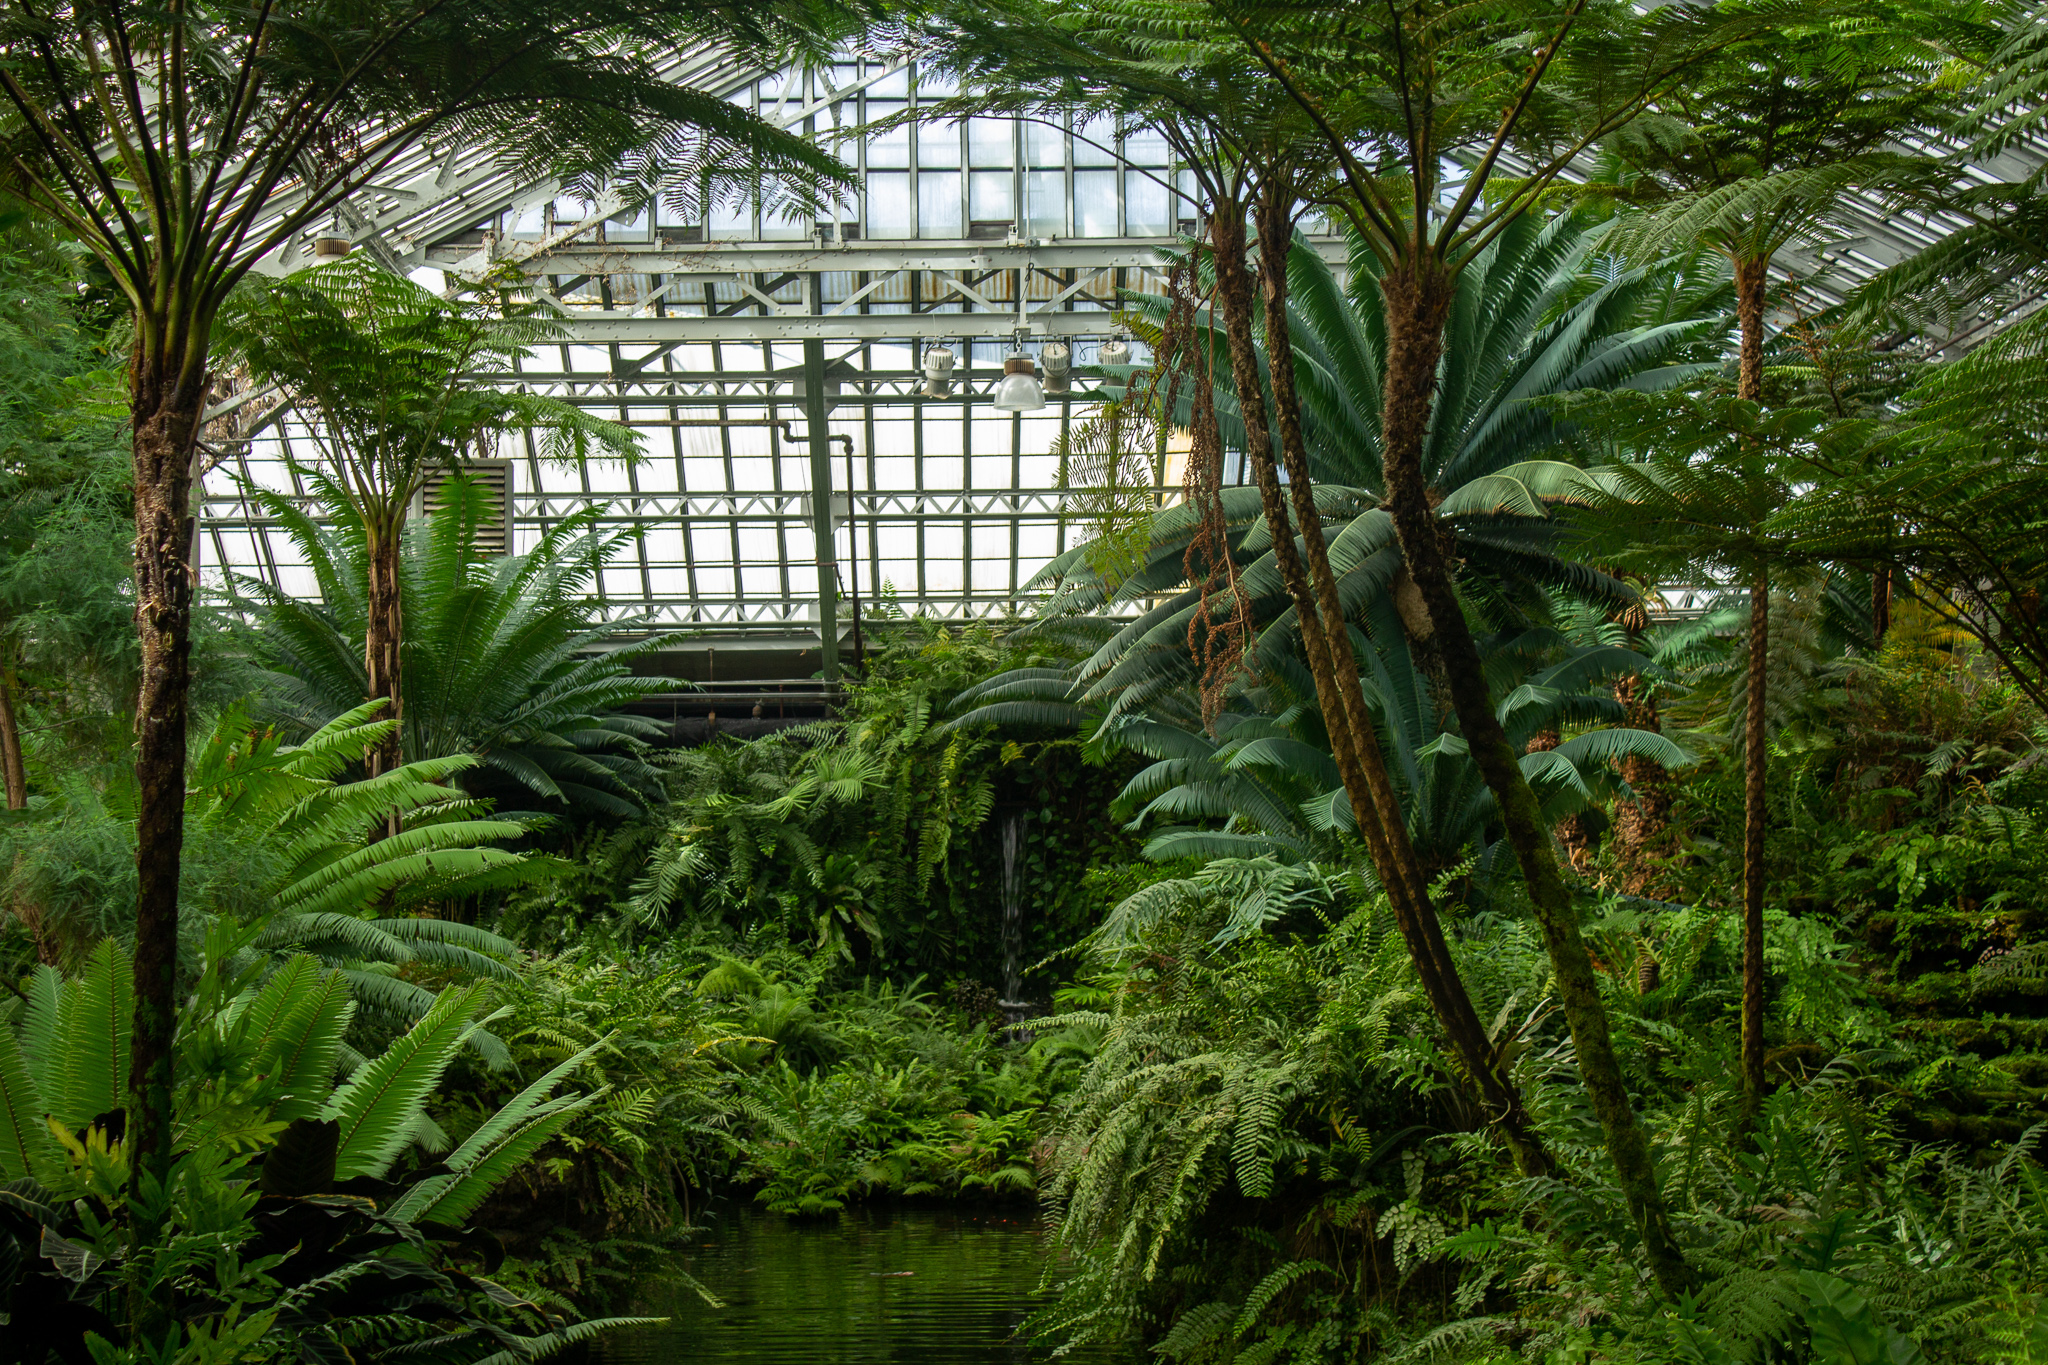 Interior of conservatory with large ferns, palm trees and a central pond